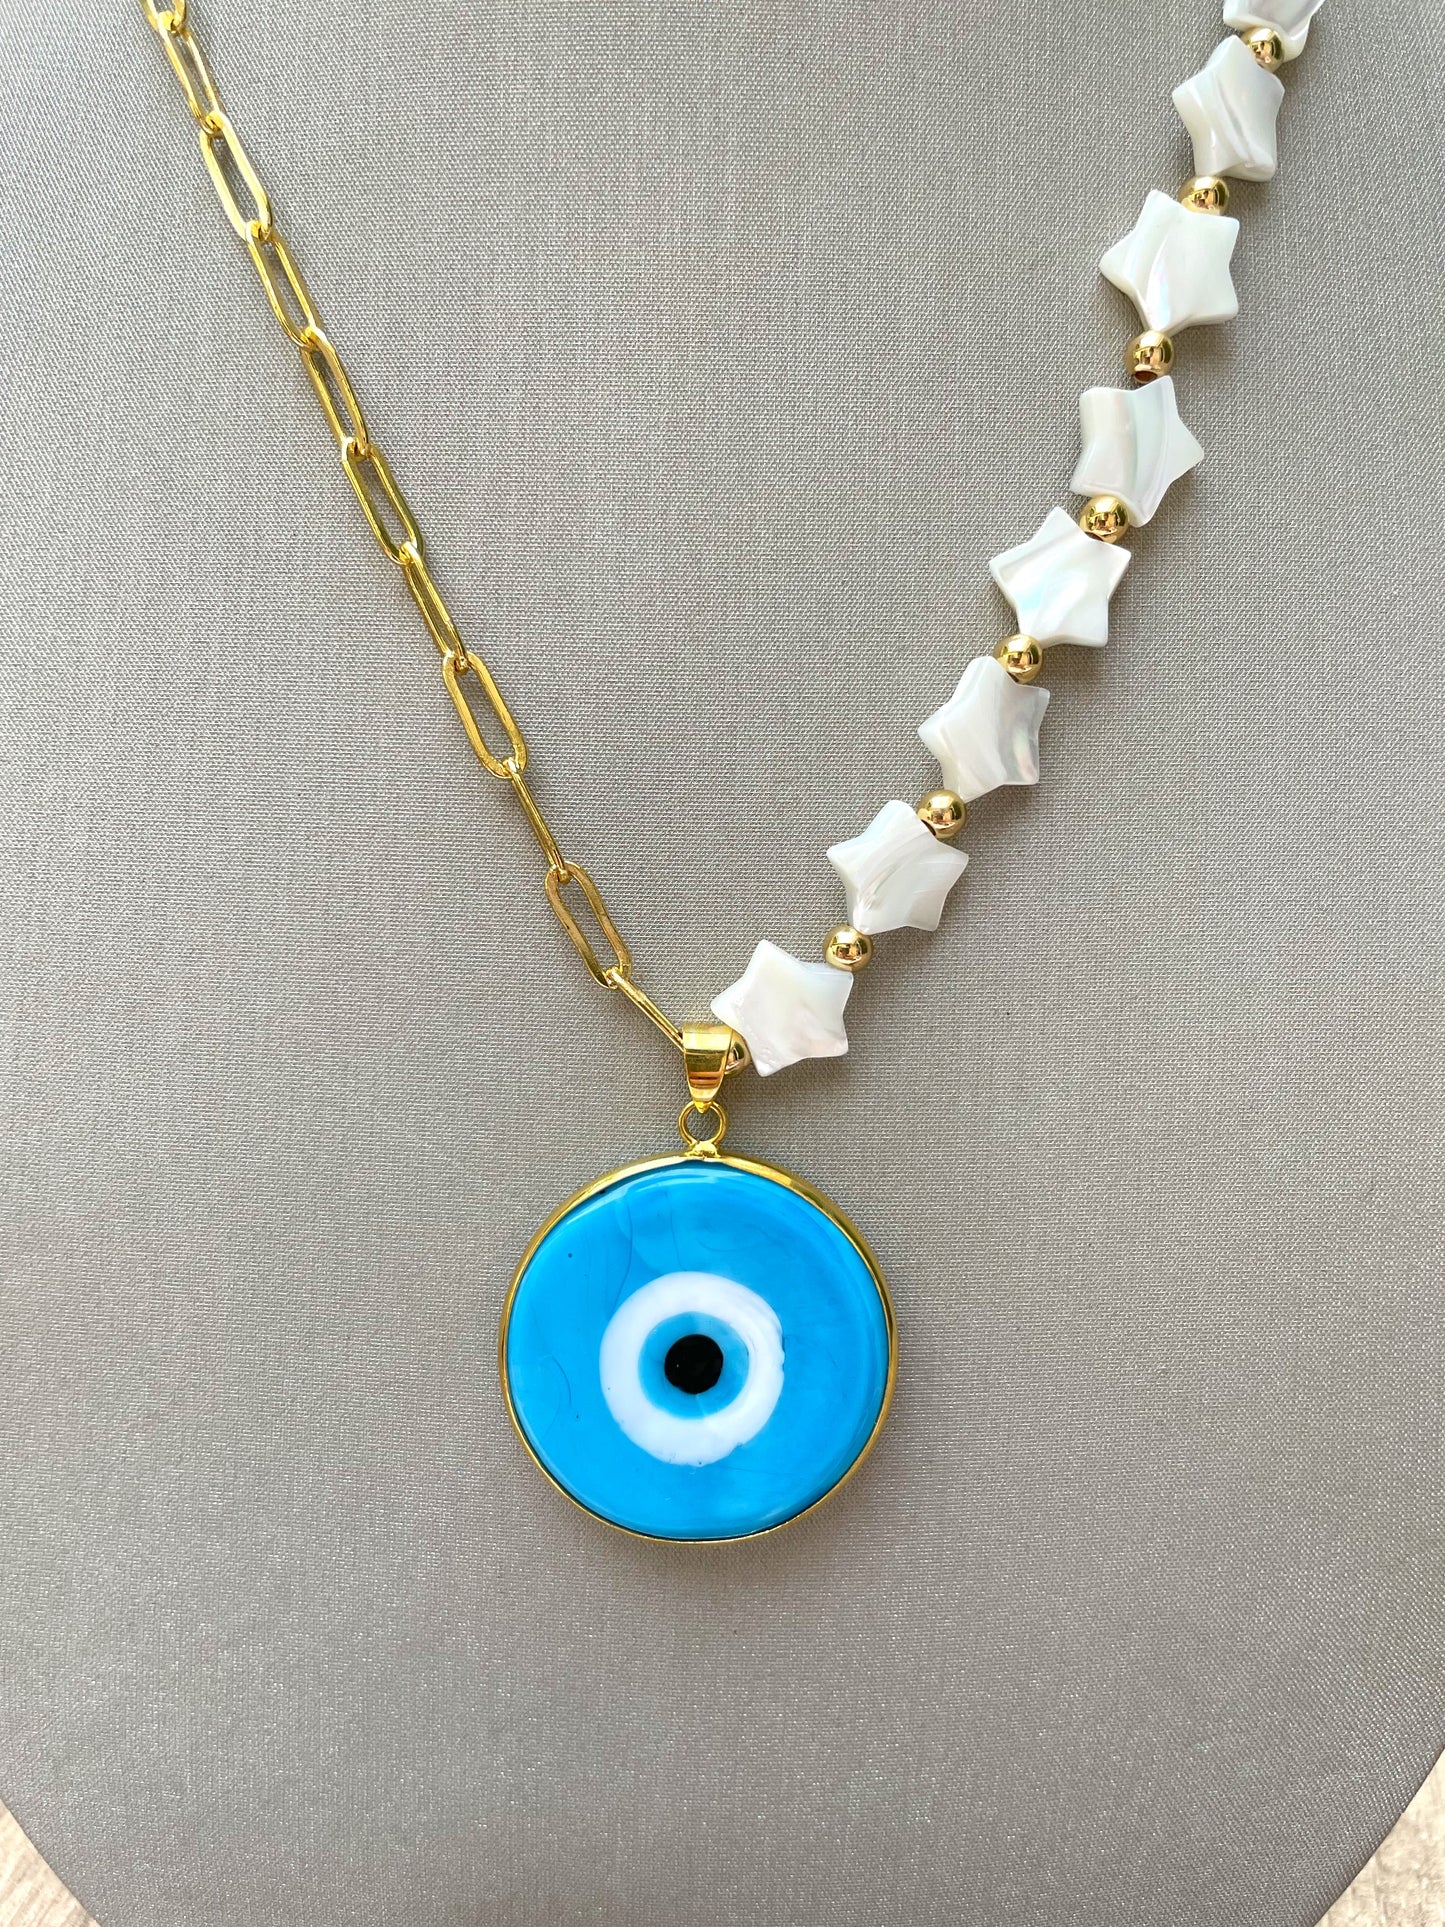 Half and half Link and stars evil eye pendant necklace